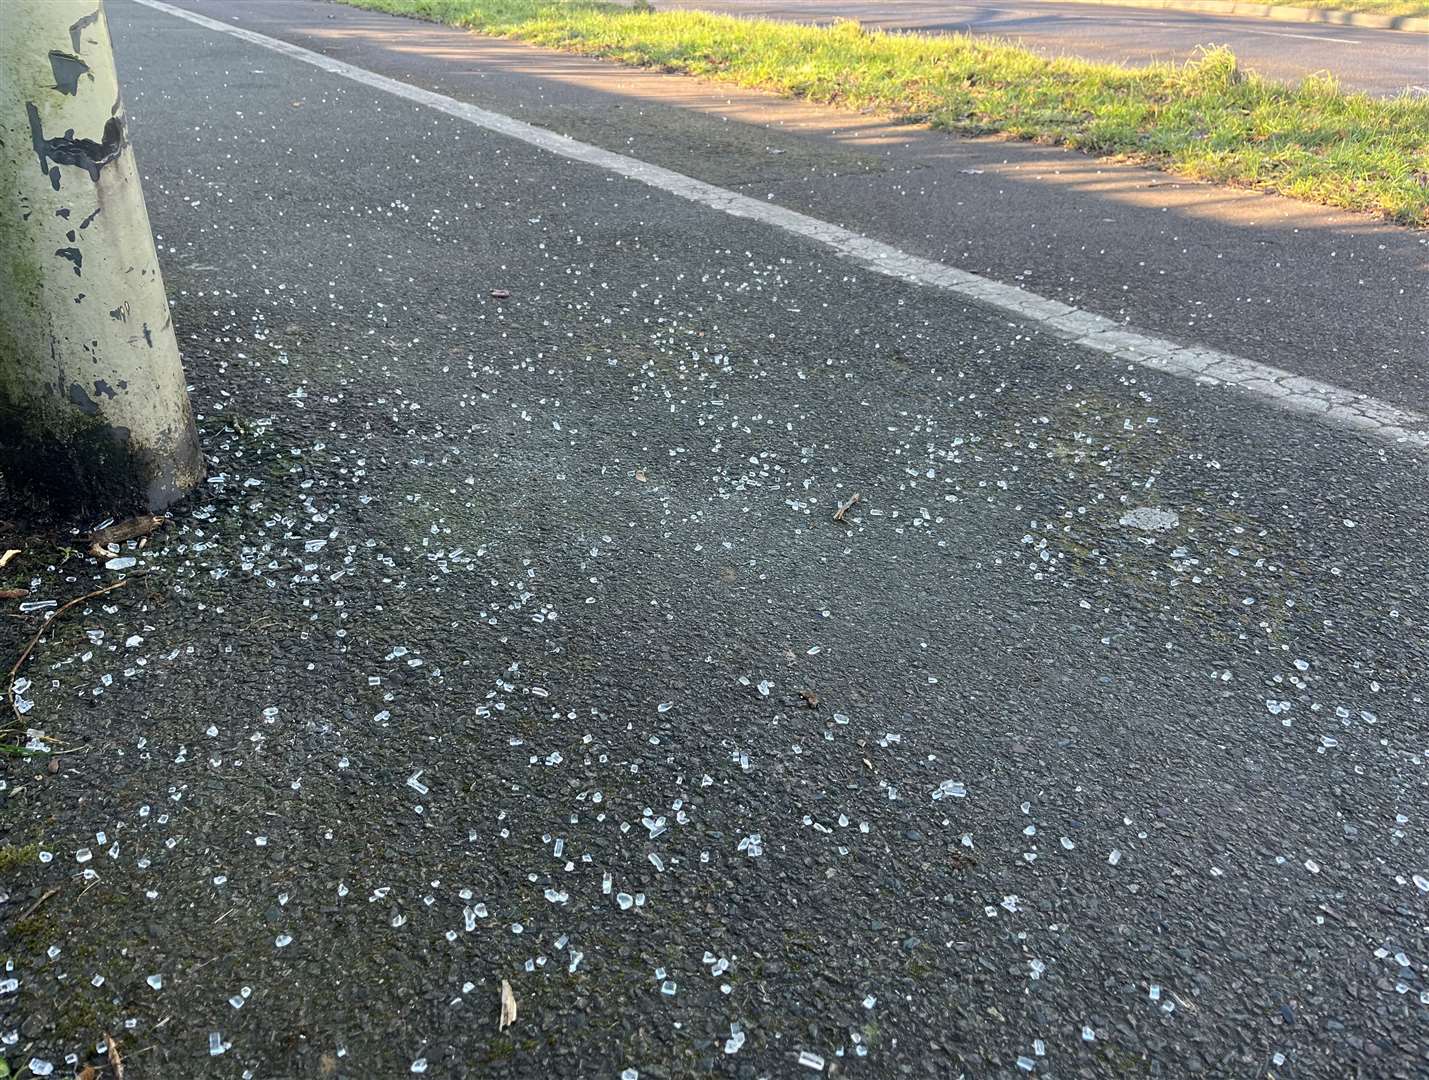 Four street lamps in Kennington were smashed leaving glass shards scattered on the pavement